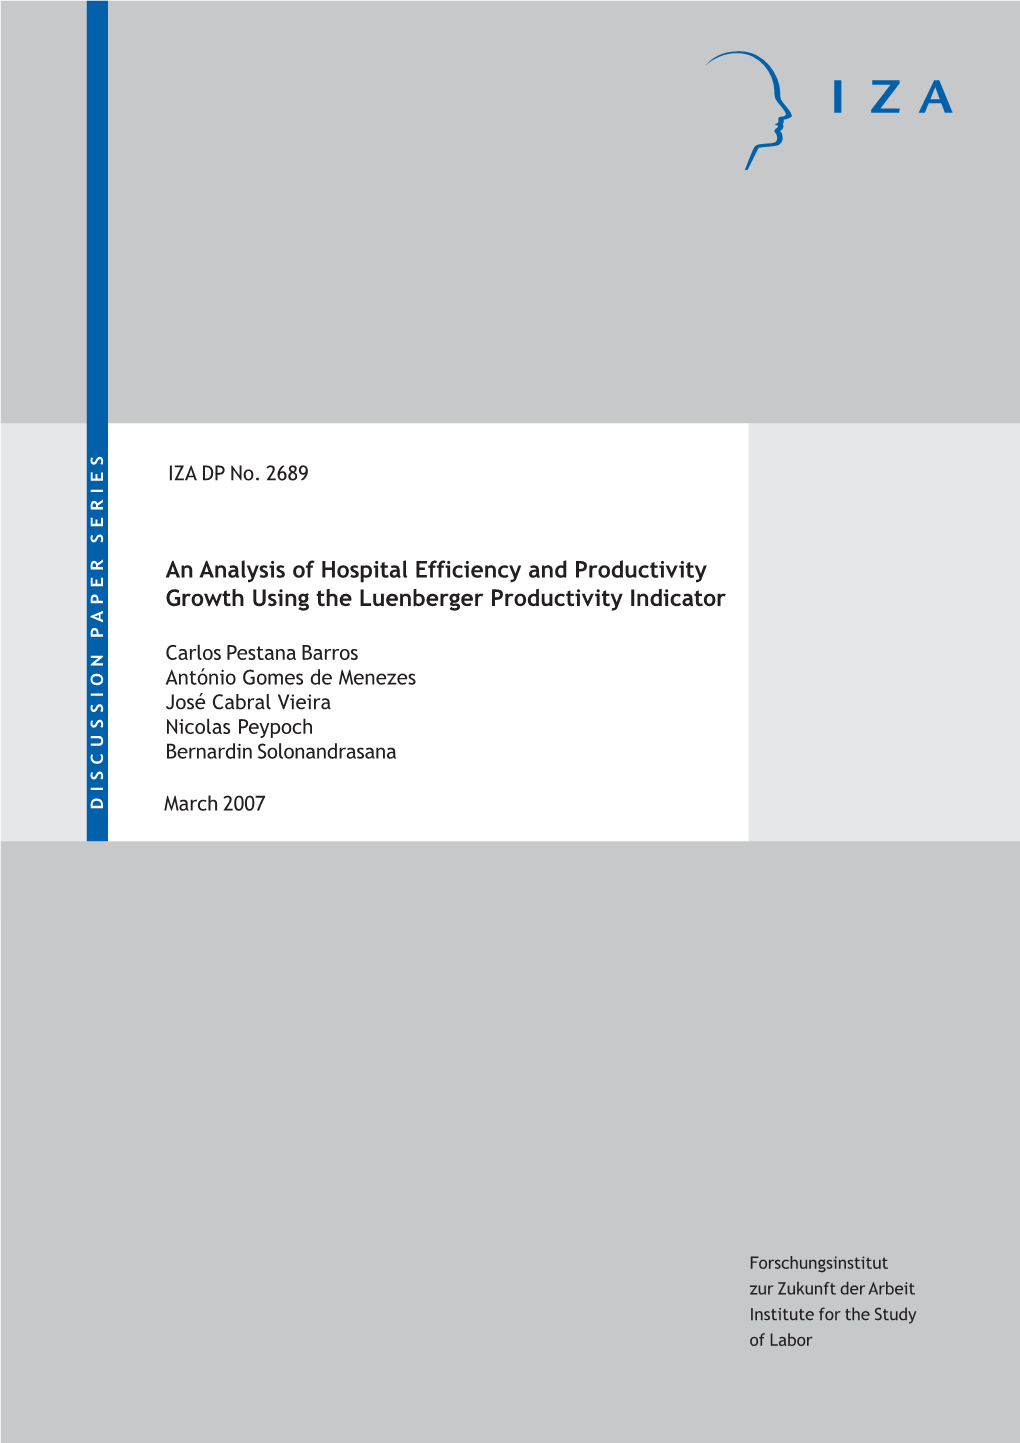 An Analysis of Hospital Efficiency and Productivity Growth Using the Luenberger Productivity Indicator